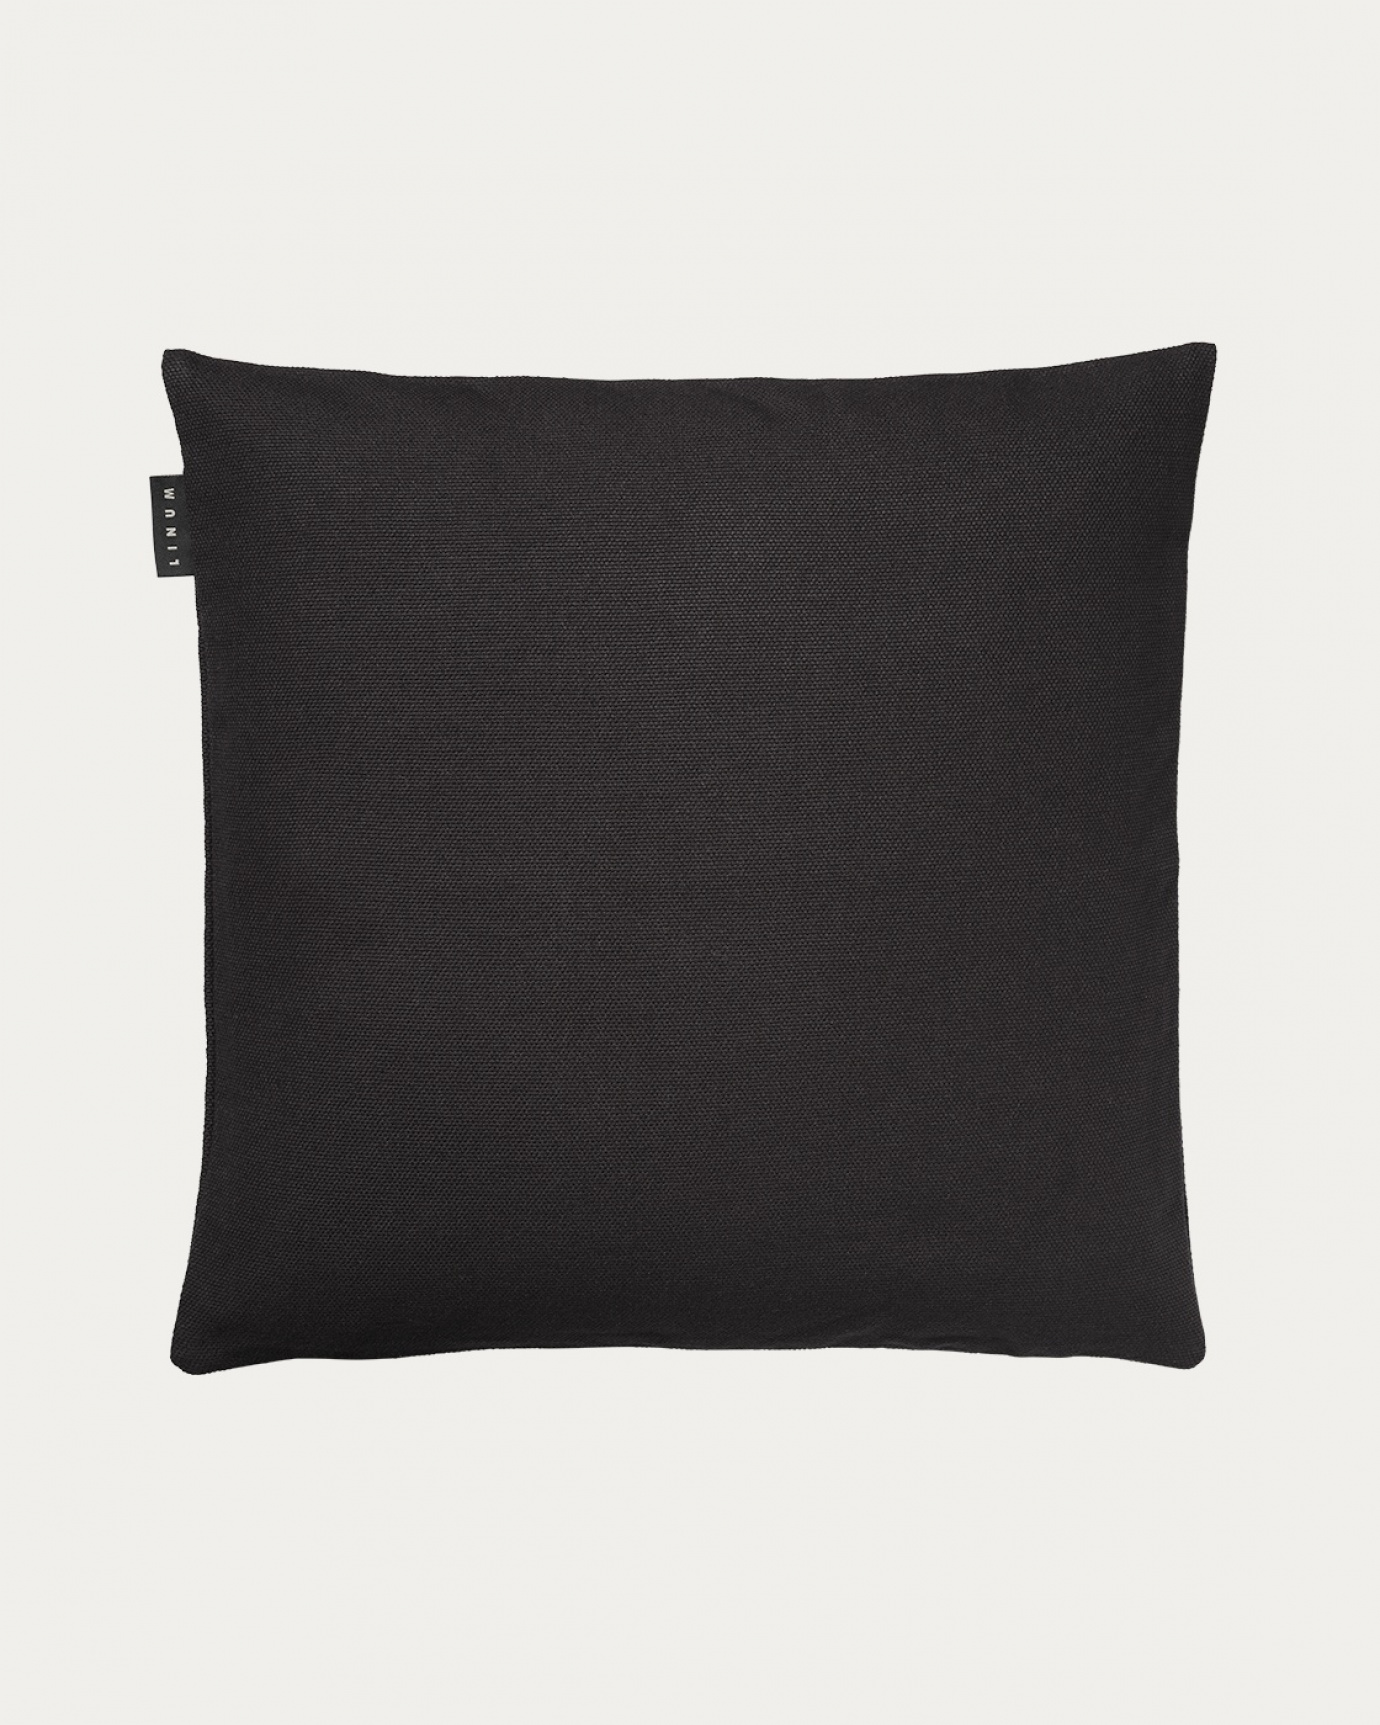 Product image black melange PEPPER cushion cover made of soft cotton from LINUM DESIGN. Easy to wash and durable for generations. Size 50x50 cm.